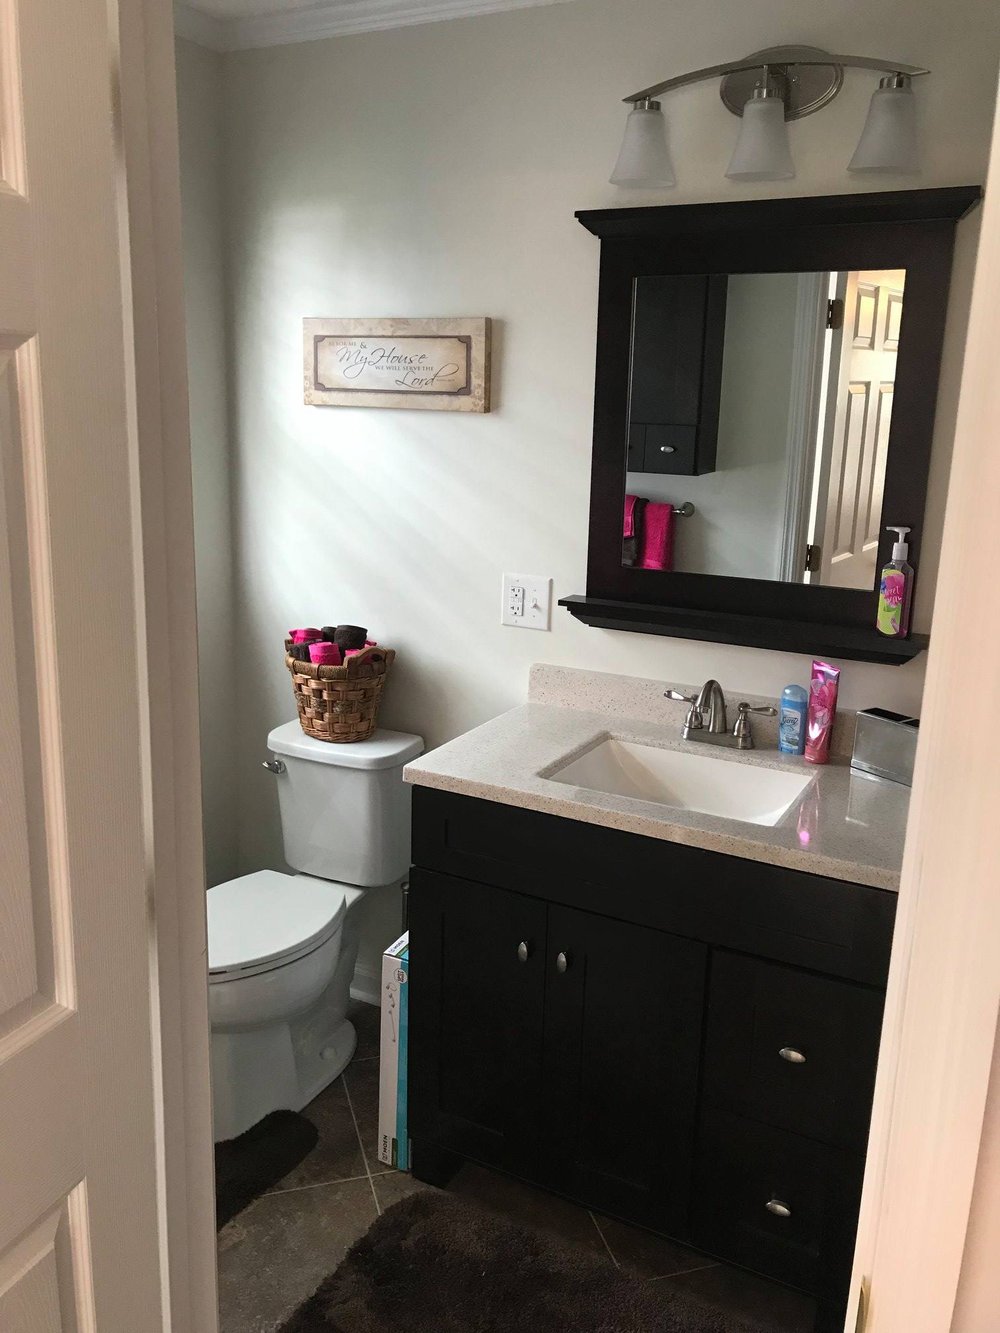 Full-Scale Bathroom Remodeling Project From The Professionals At Causey's Flooring Center